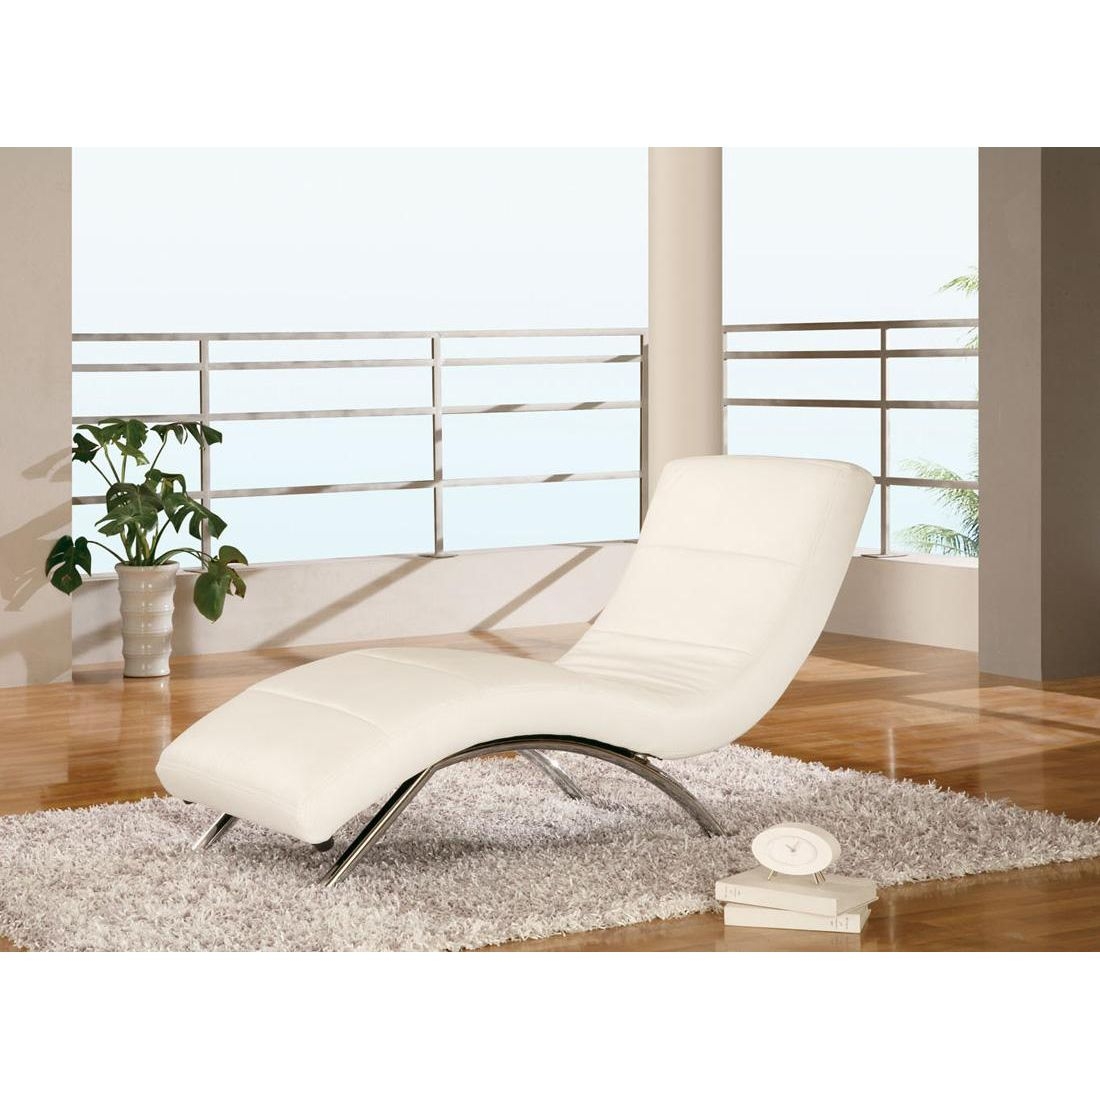 Leather chaise lounge chairs 5